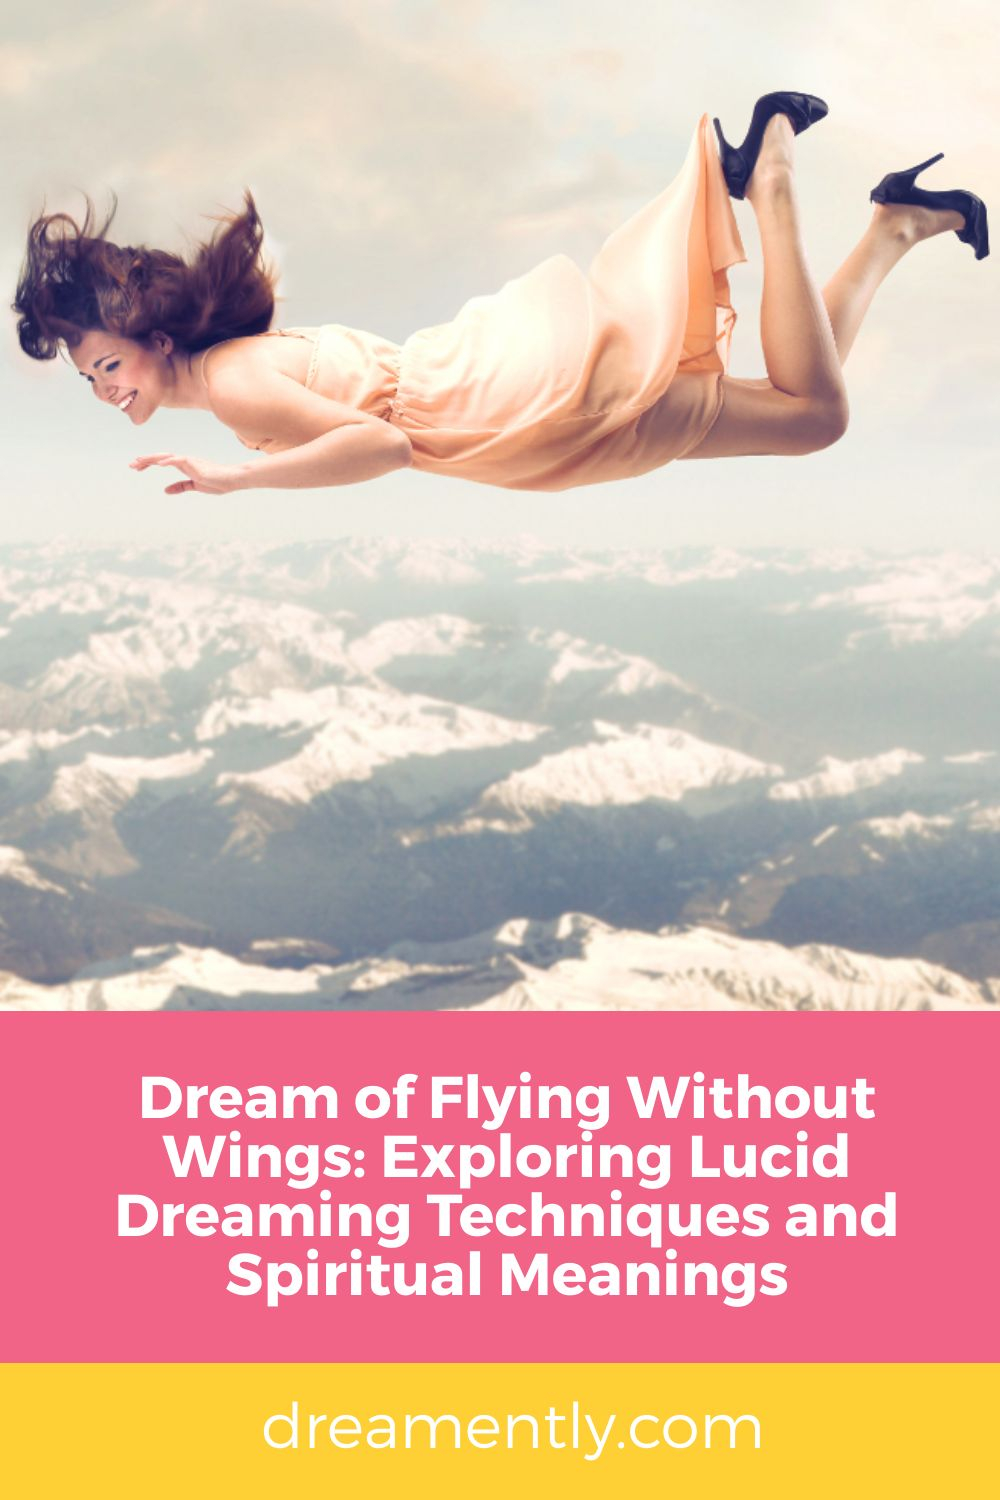 Dream of Flying Without Wings Exploring Lucid Dreaming Techniques and Spiritual Meanings